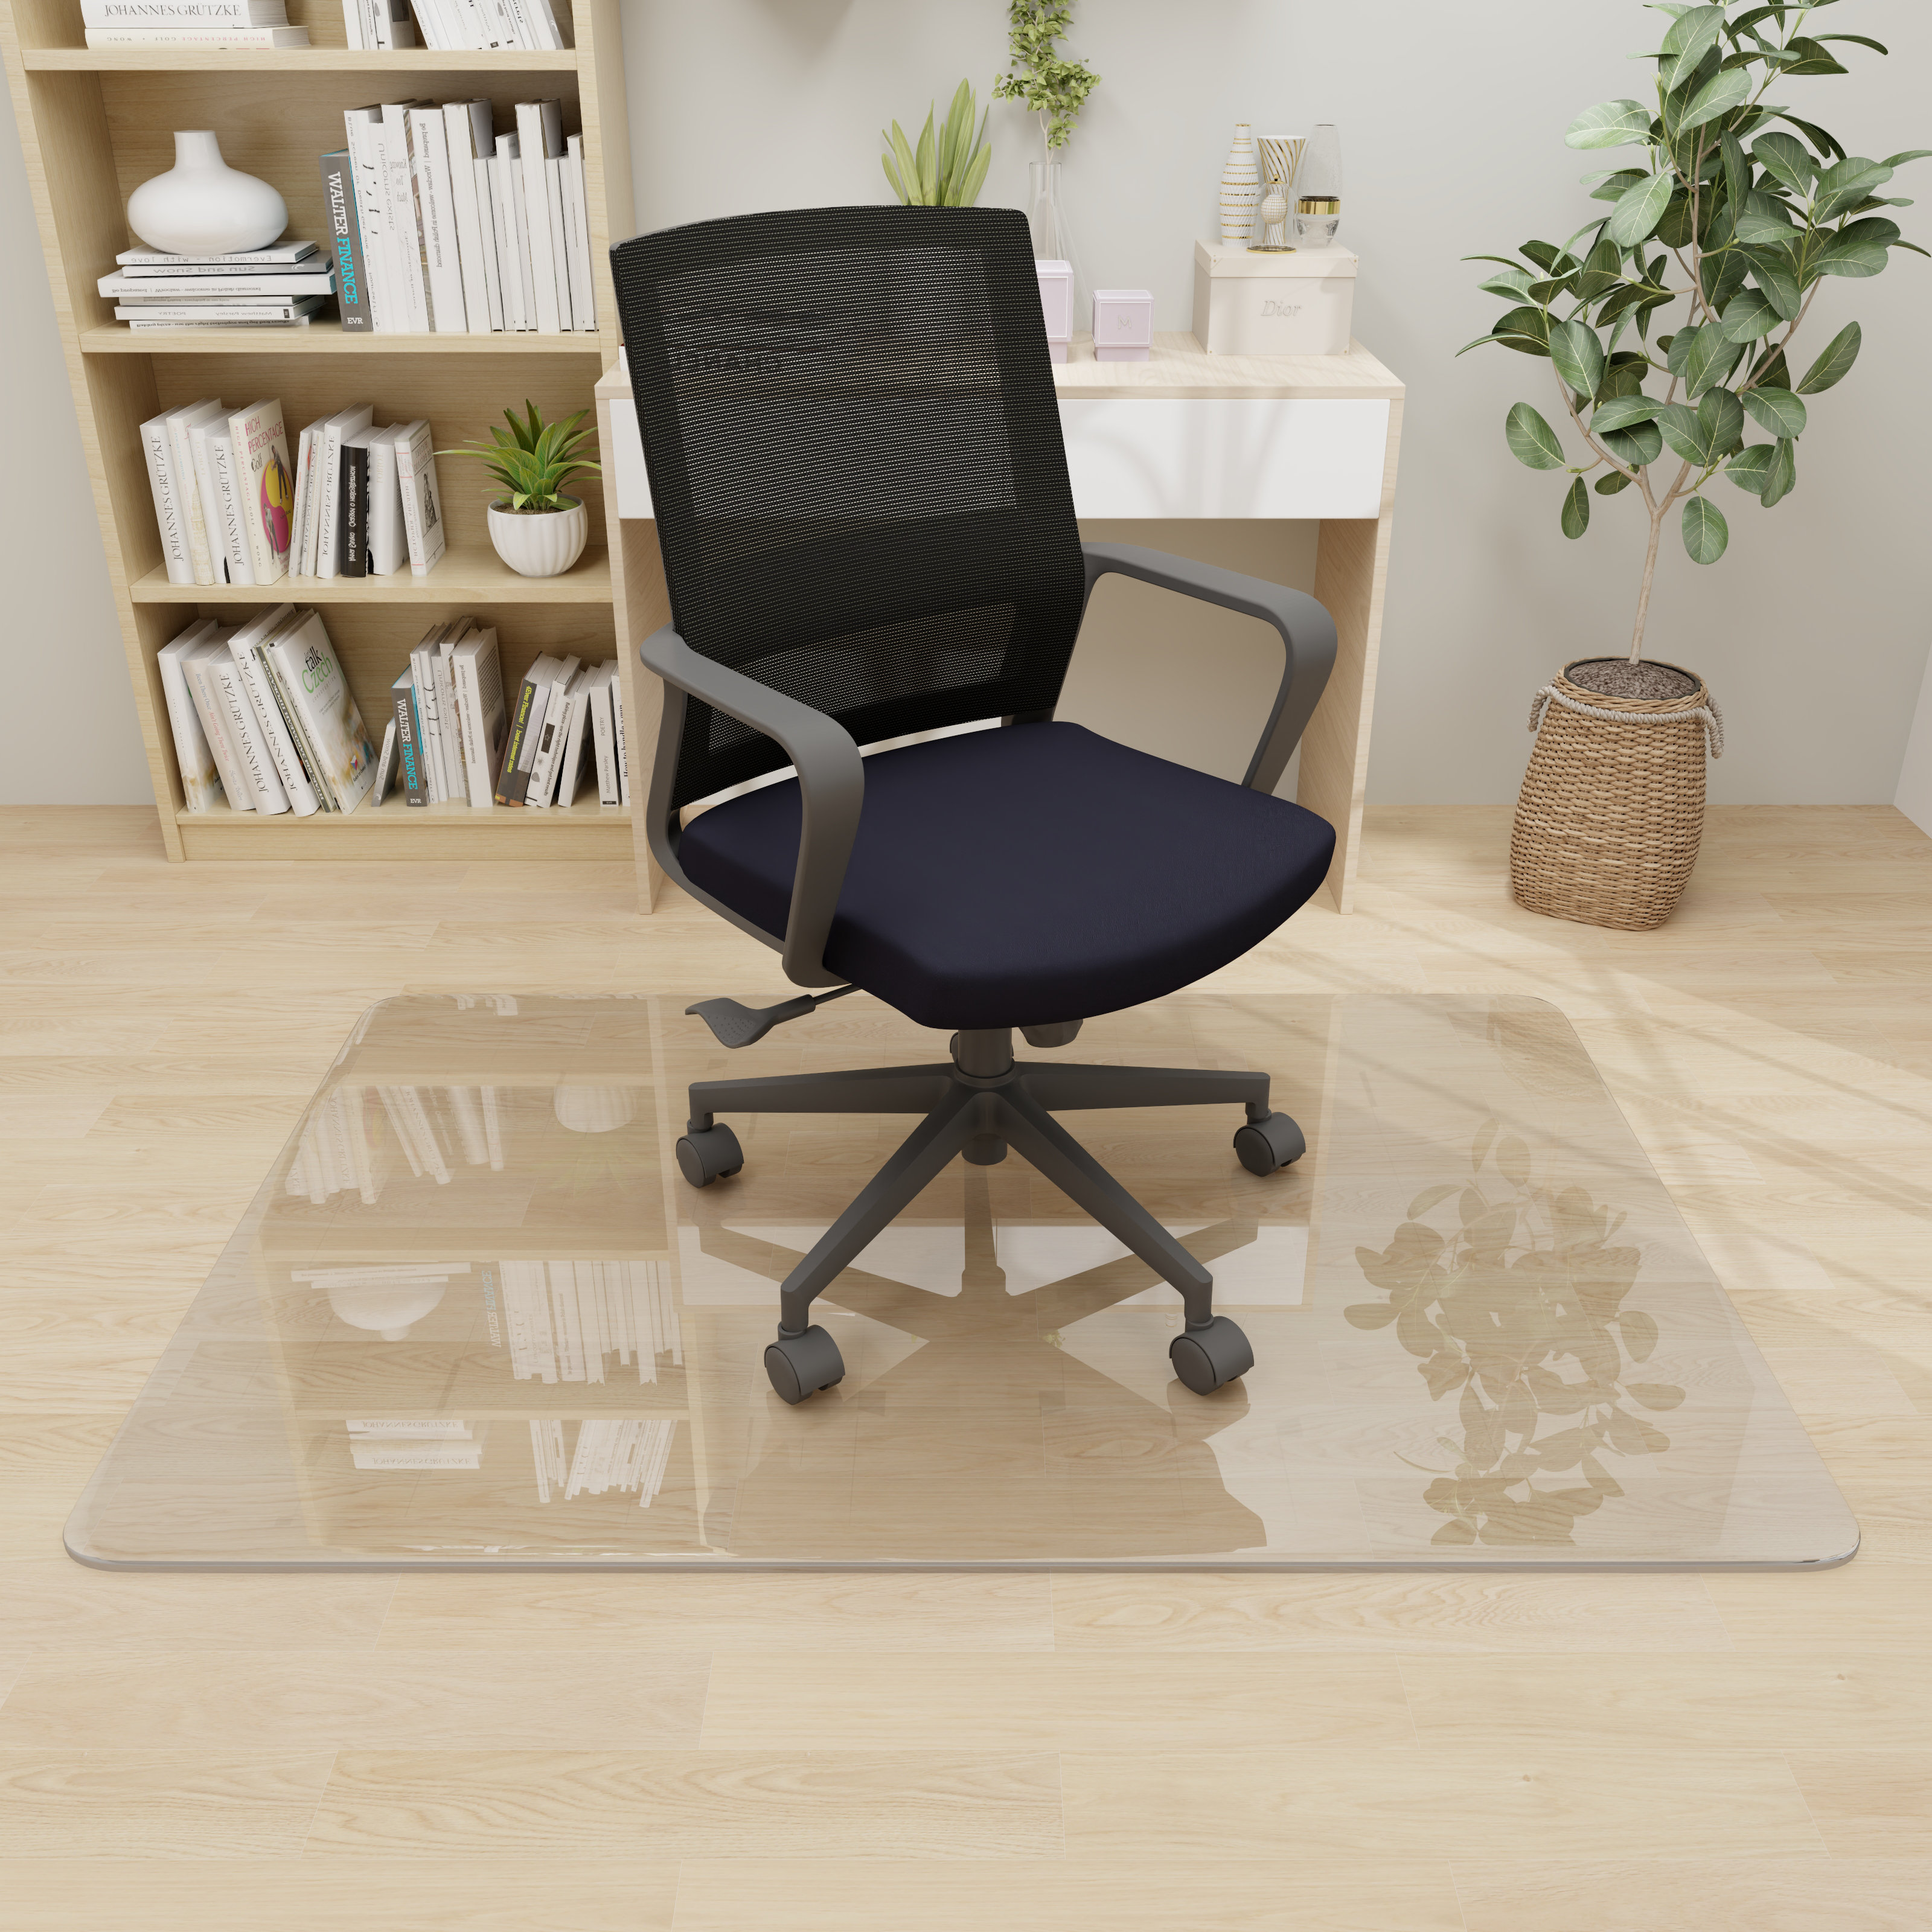 BEAUTYPEAK Tempered Glass Chair Mat For Hardwood Floor, Clear Tempered  Glass With 4 Anti-Slip Pads, Office Chair Mats For Carpeted Floor, Chair Mat  For Hardwood Floor, Desk Chair Mat & Reviews |